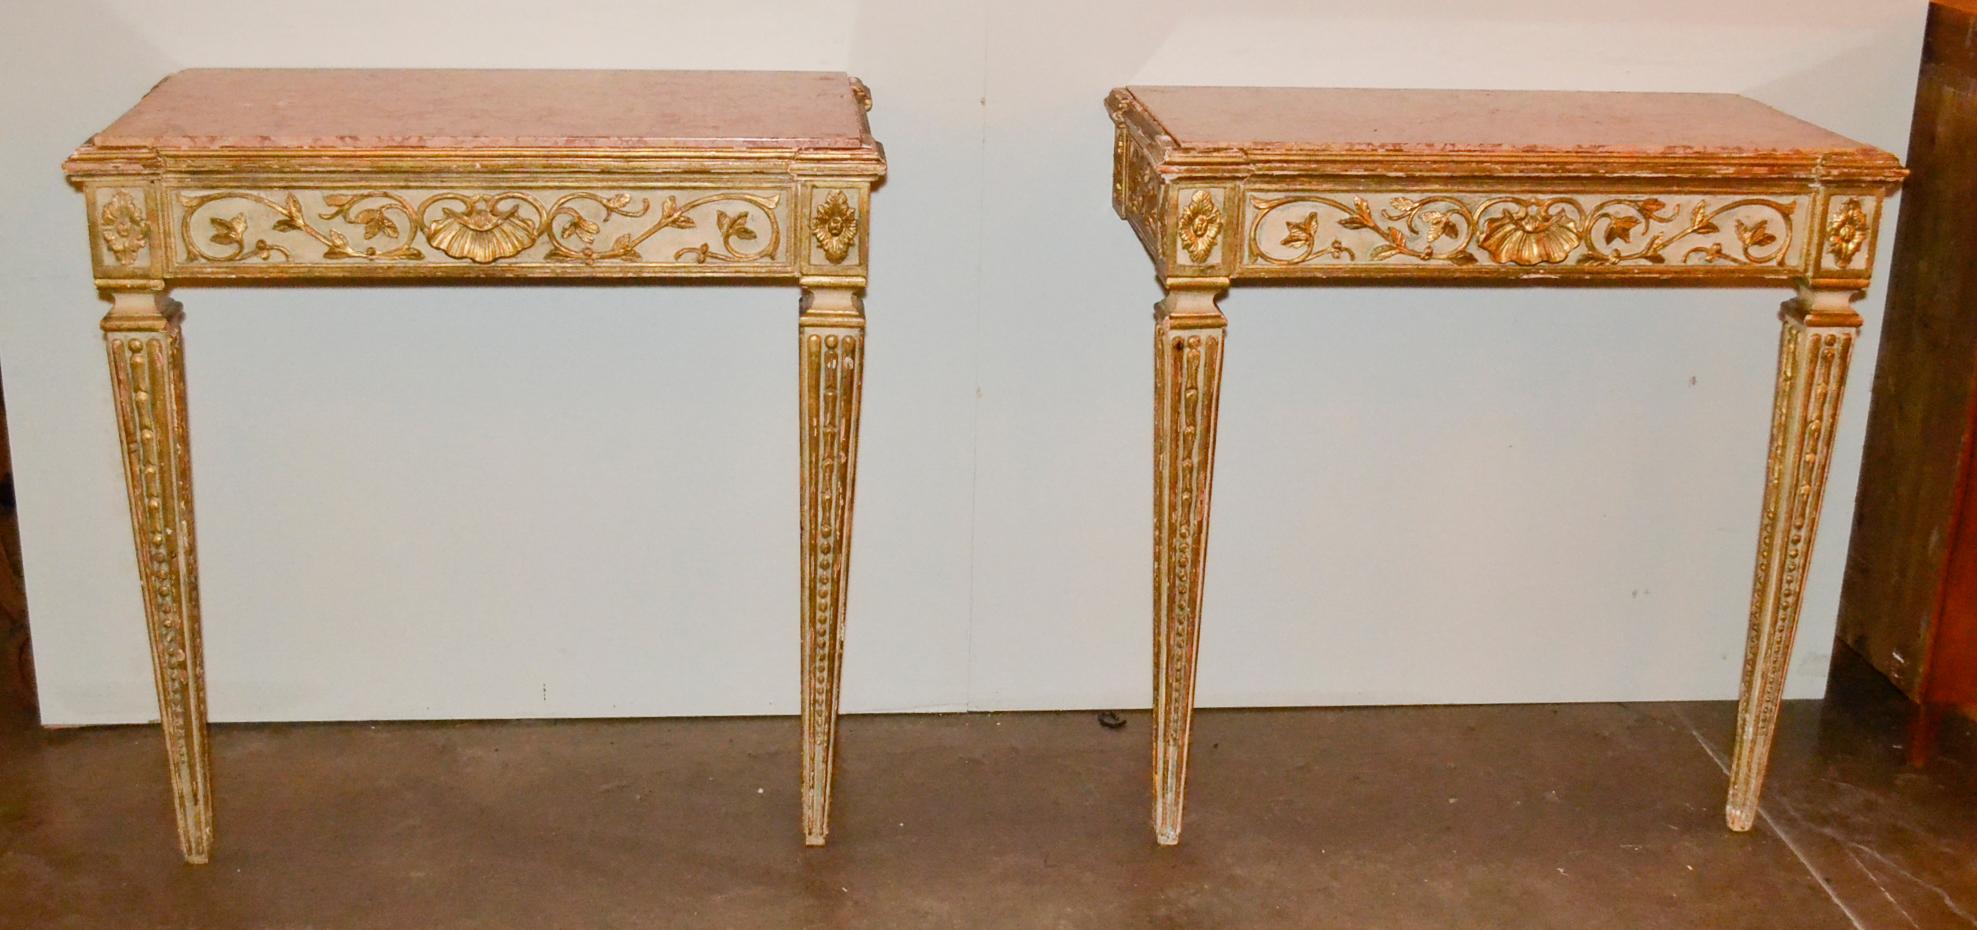 19th Century French Neoclassical Consoles 2